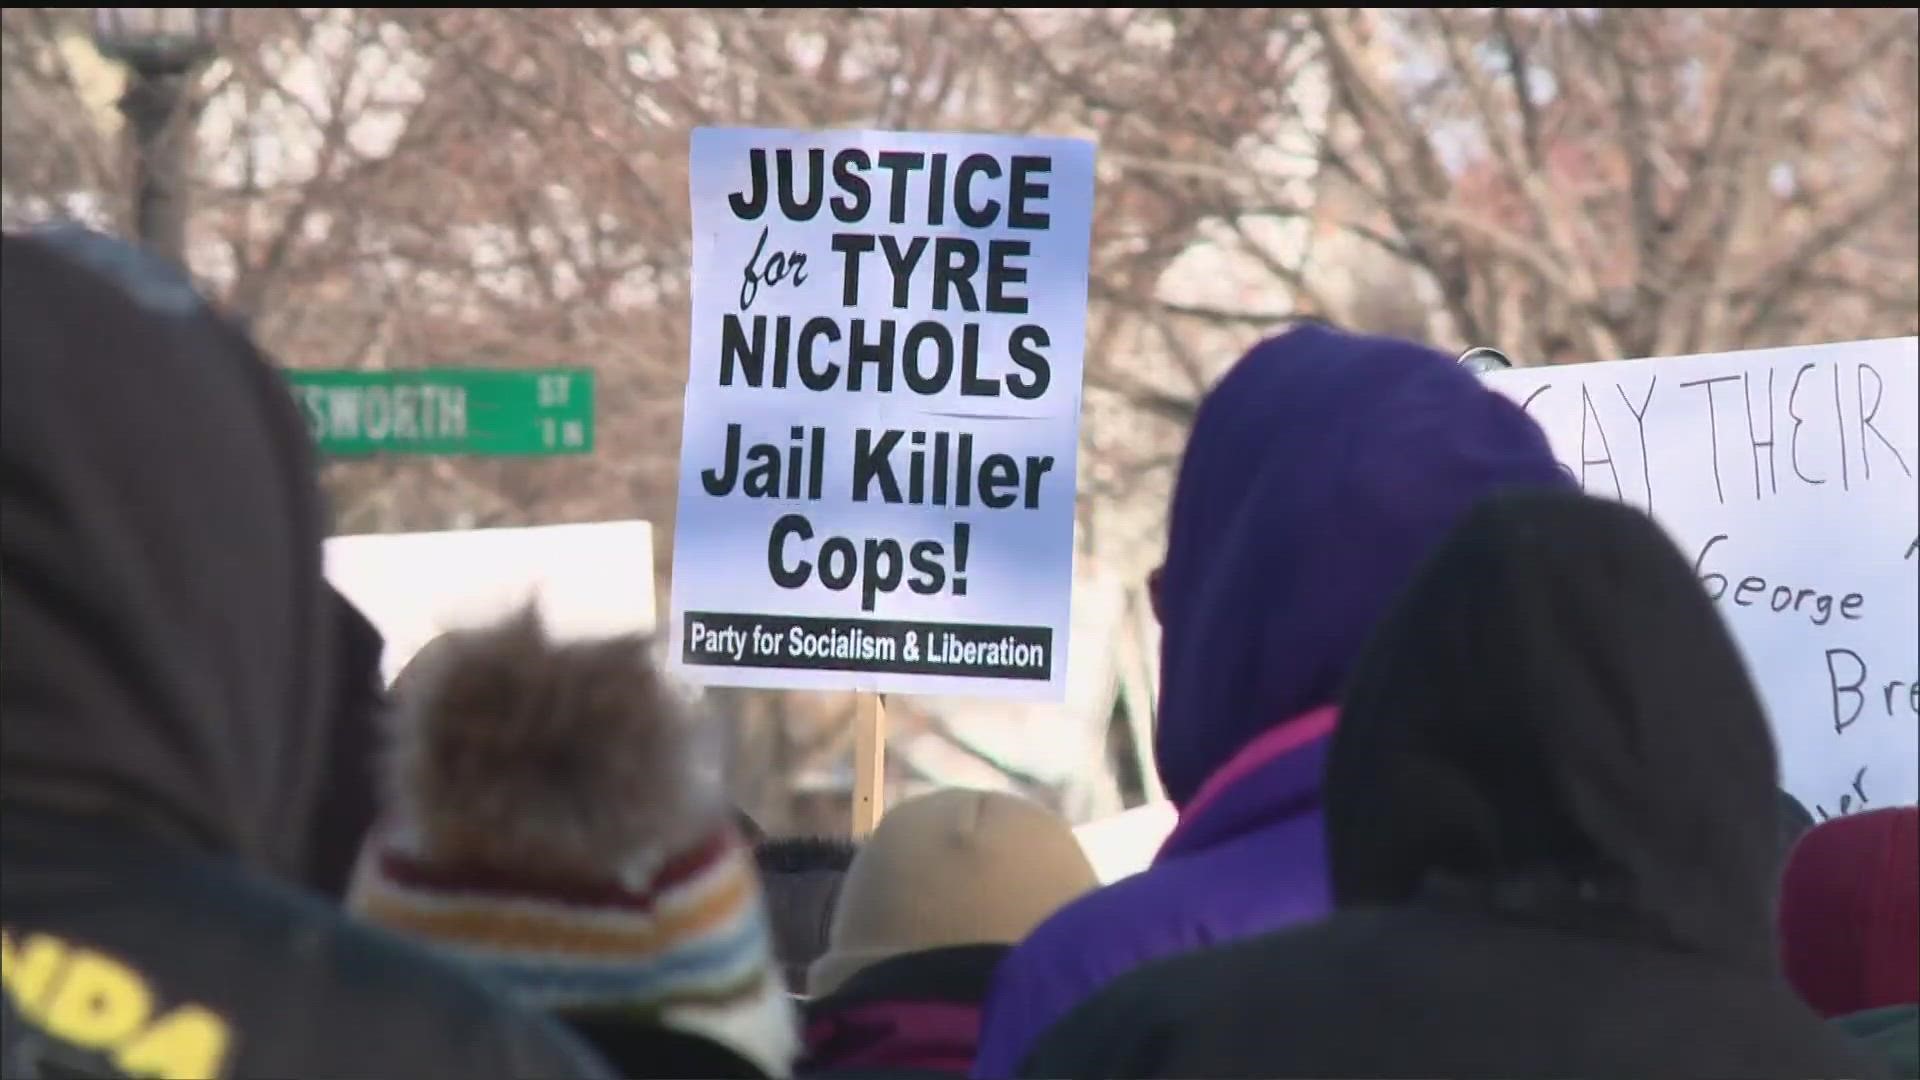 Several local groups who attended the march said it was in solidarity with the family of Tyre Nichols.